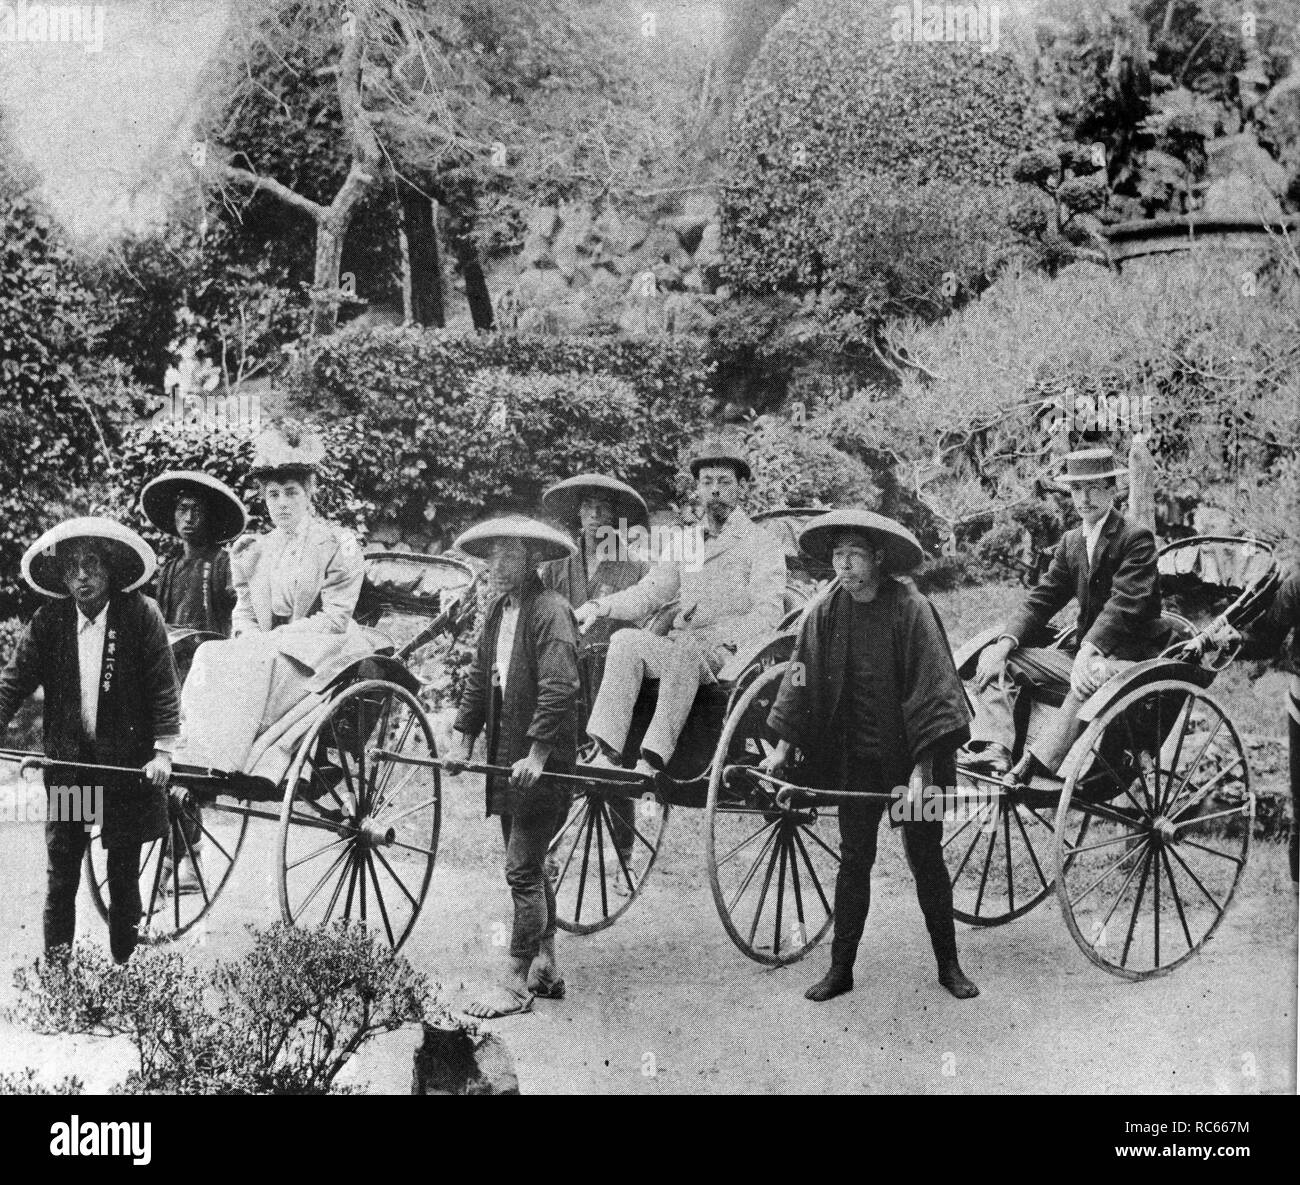 Winston Churchill's father, Lord Randolph Churchill and his mother, Lady Churchill, travelling in rickshaws in Japan. Stock Photo